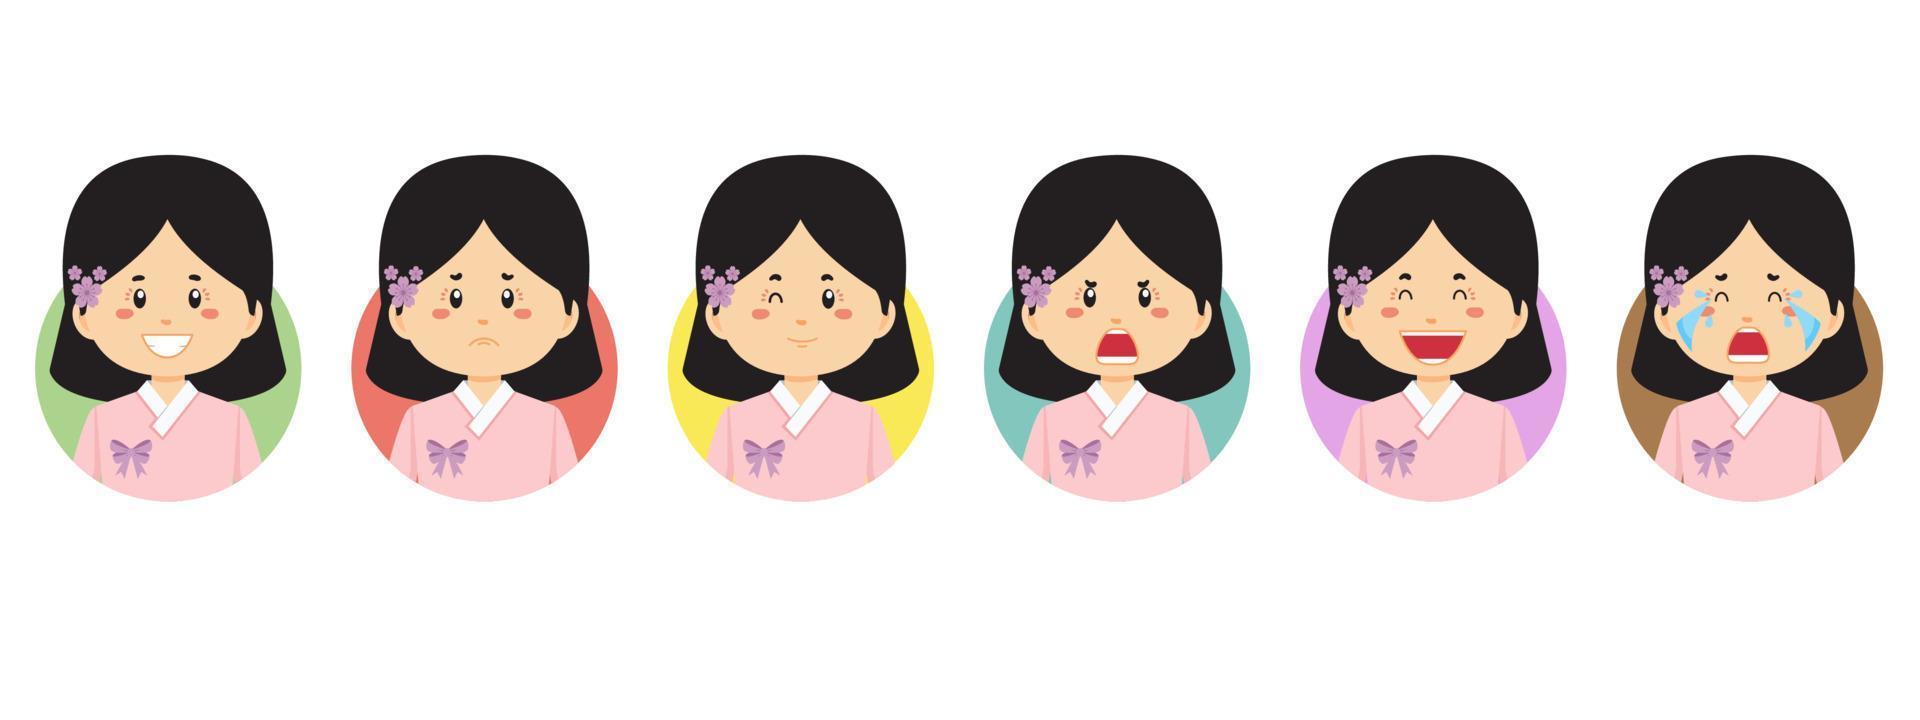 South Korea Avatar with Various Expression vector